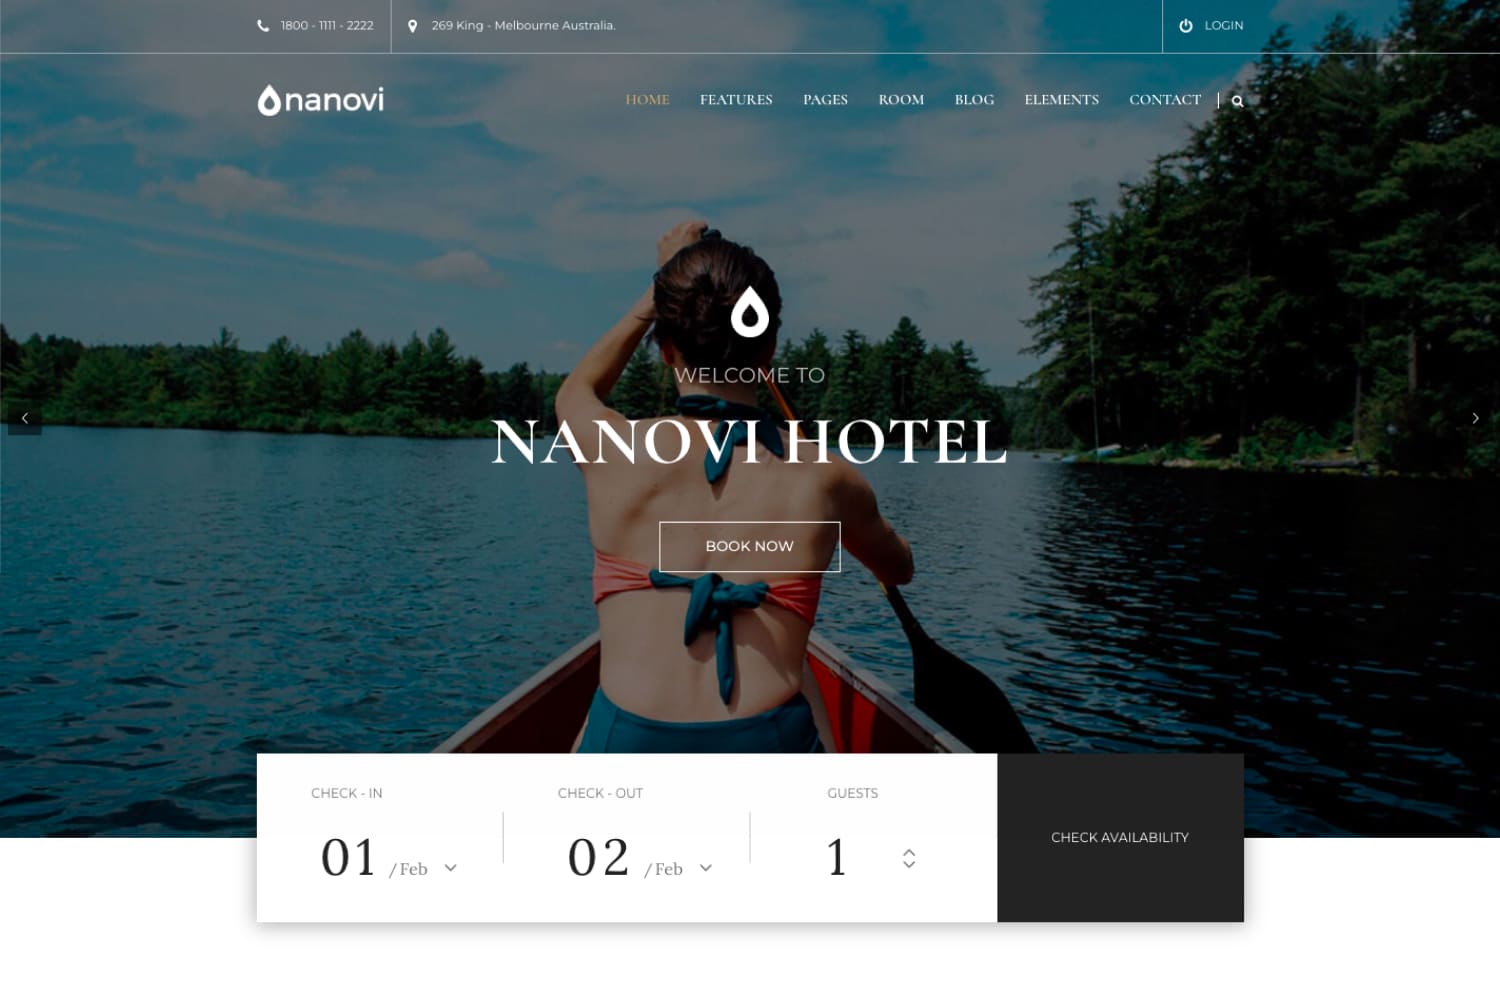 Hotel website front page with photo of a girl in a canoe on the lake and a booking block.